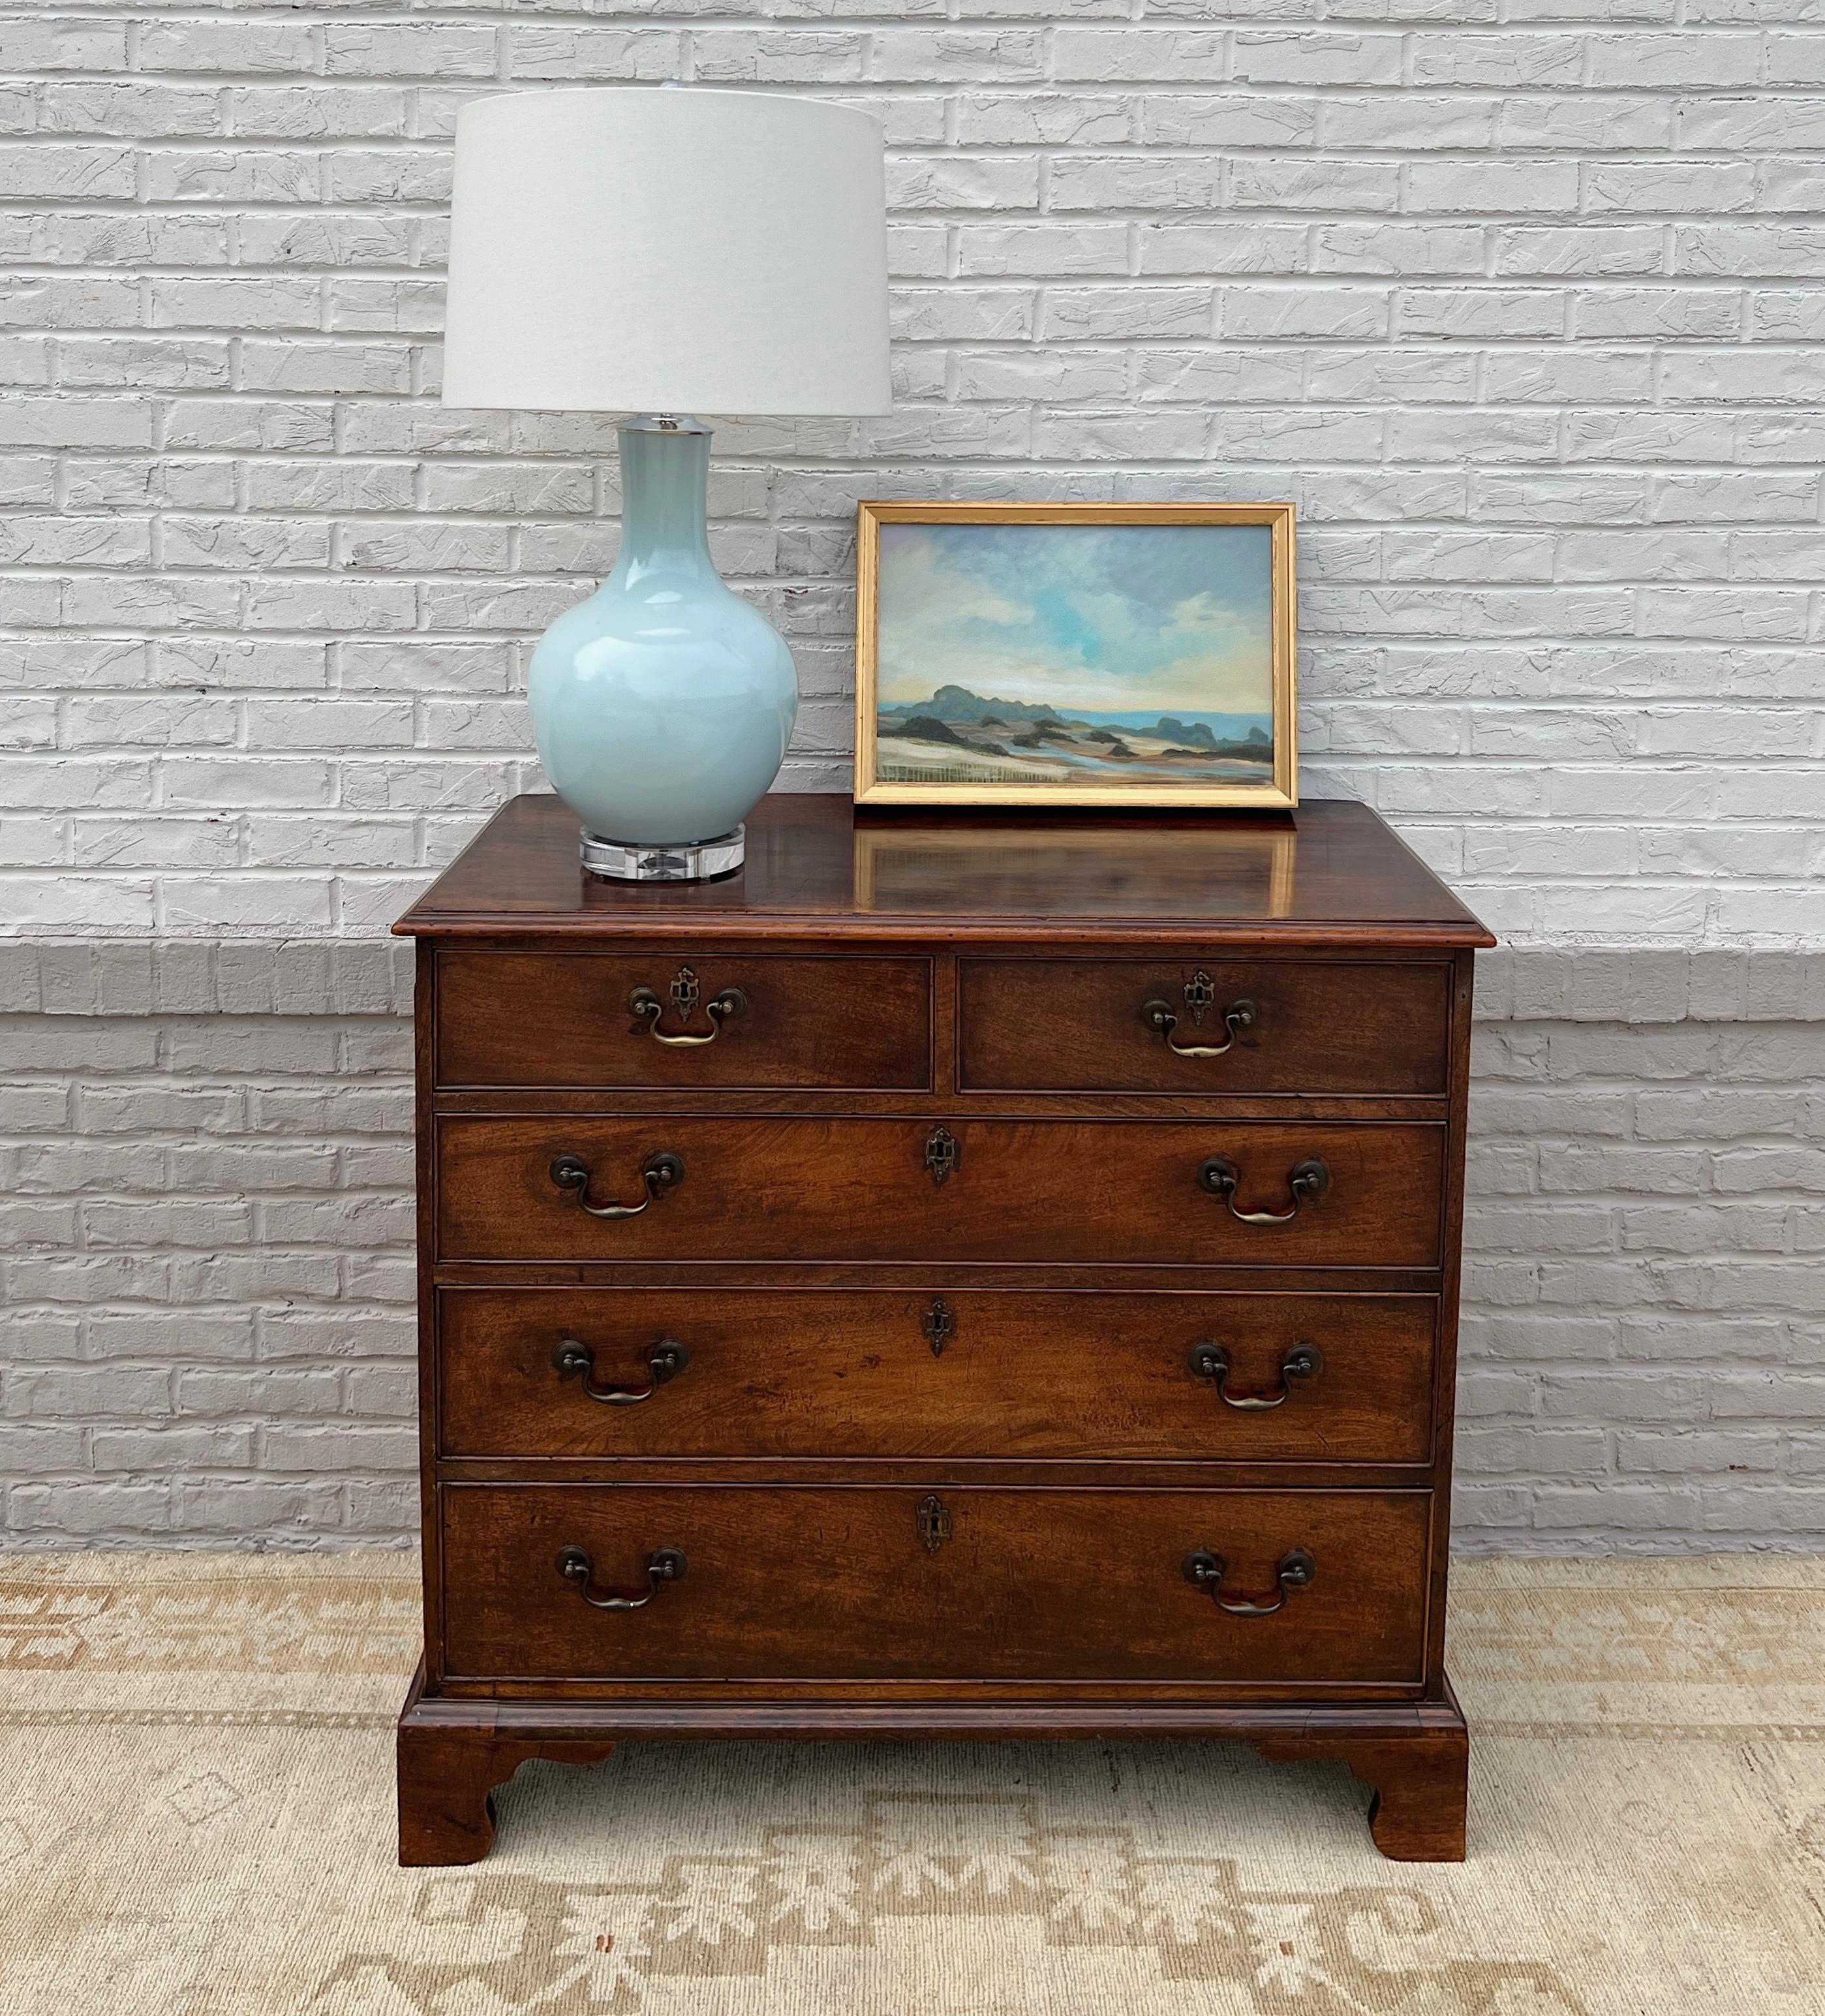 An elegant 18th century English country mahogany chest of drawers with beautiful coloring. Handsome swan-neck brasses and escutcheons adorn the five dovetailed drawers. Standing on graceful bracket feet. A truly beautiful antique that will be